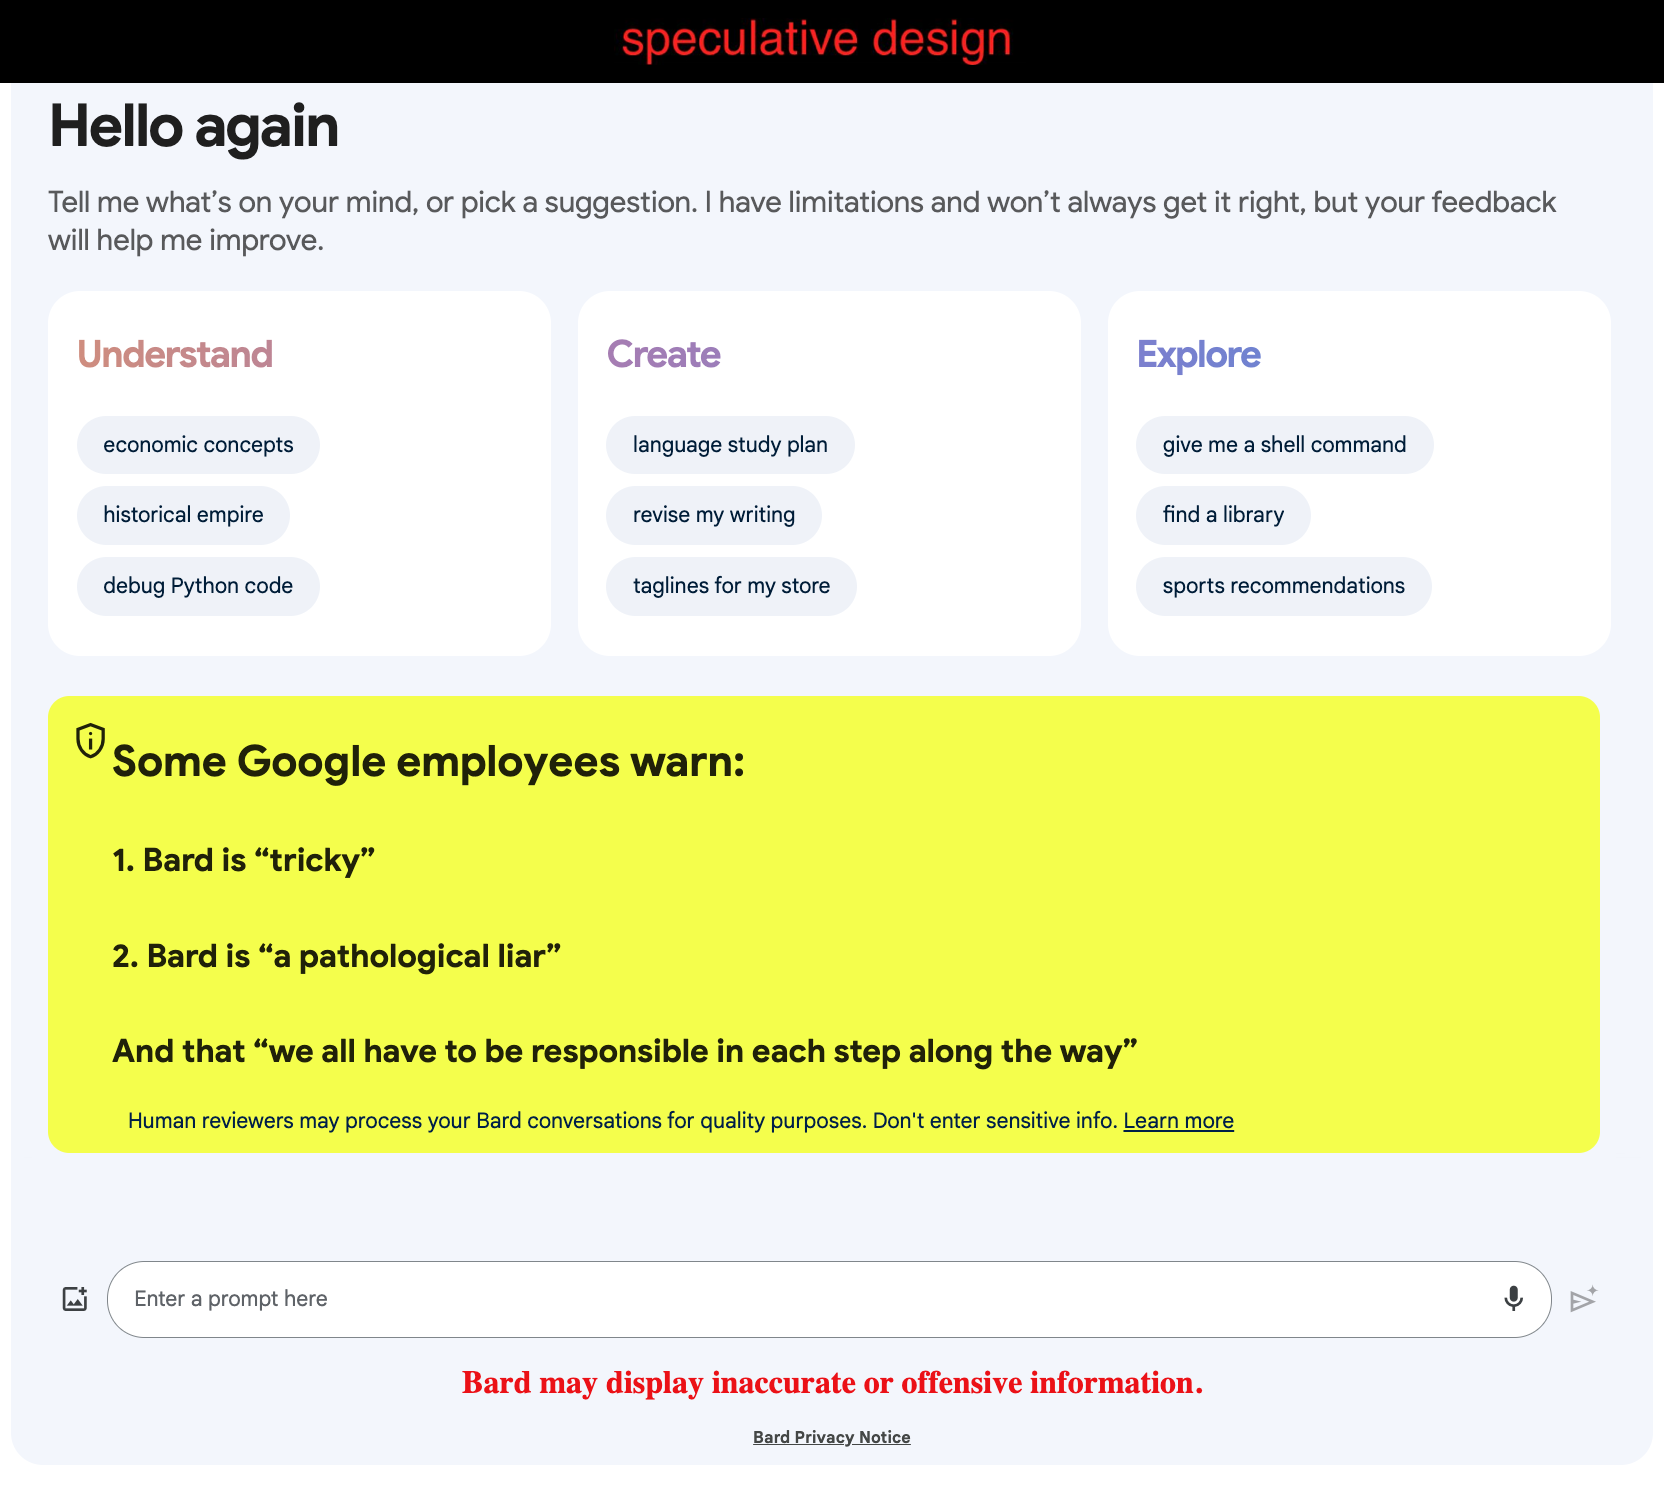 A speculative design of the Bard main page with highlighted warnings from employees.